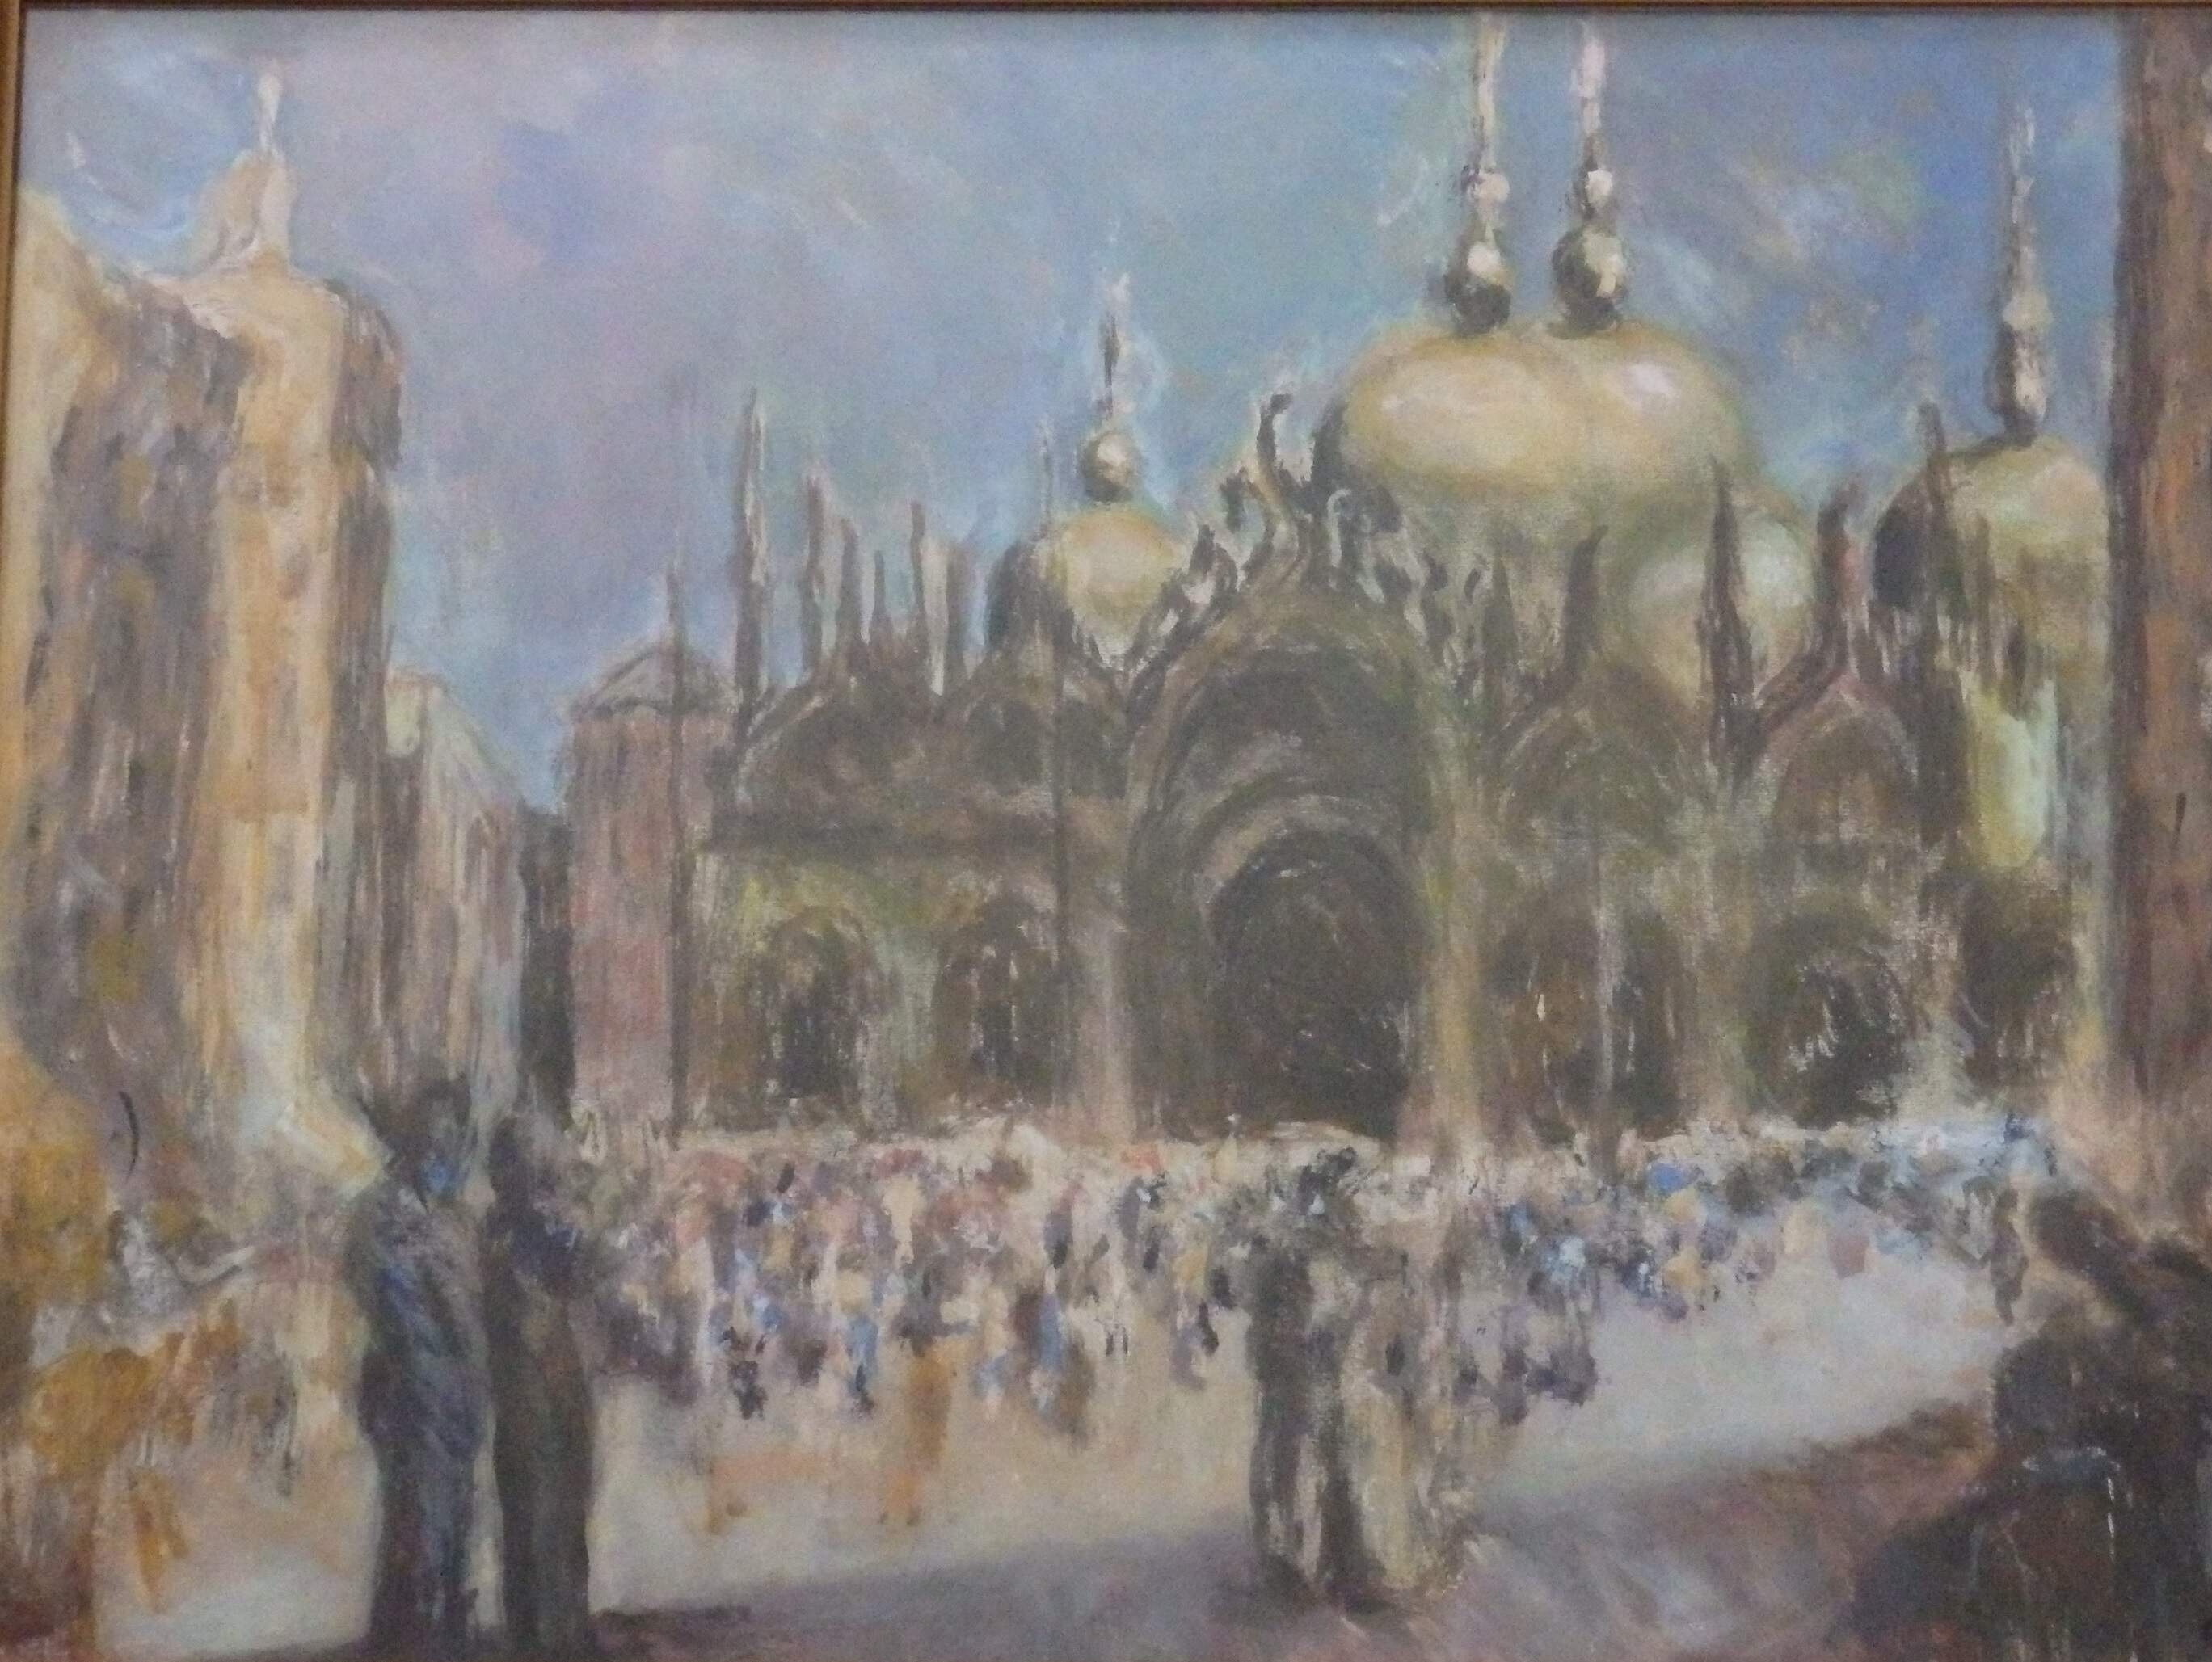 VENICE - VIEW OF SAINT MARK'S SQUARE. MIXED MEDIA PAINTING. EVE DISHER.